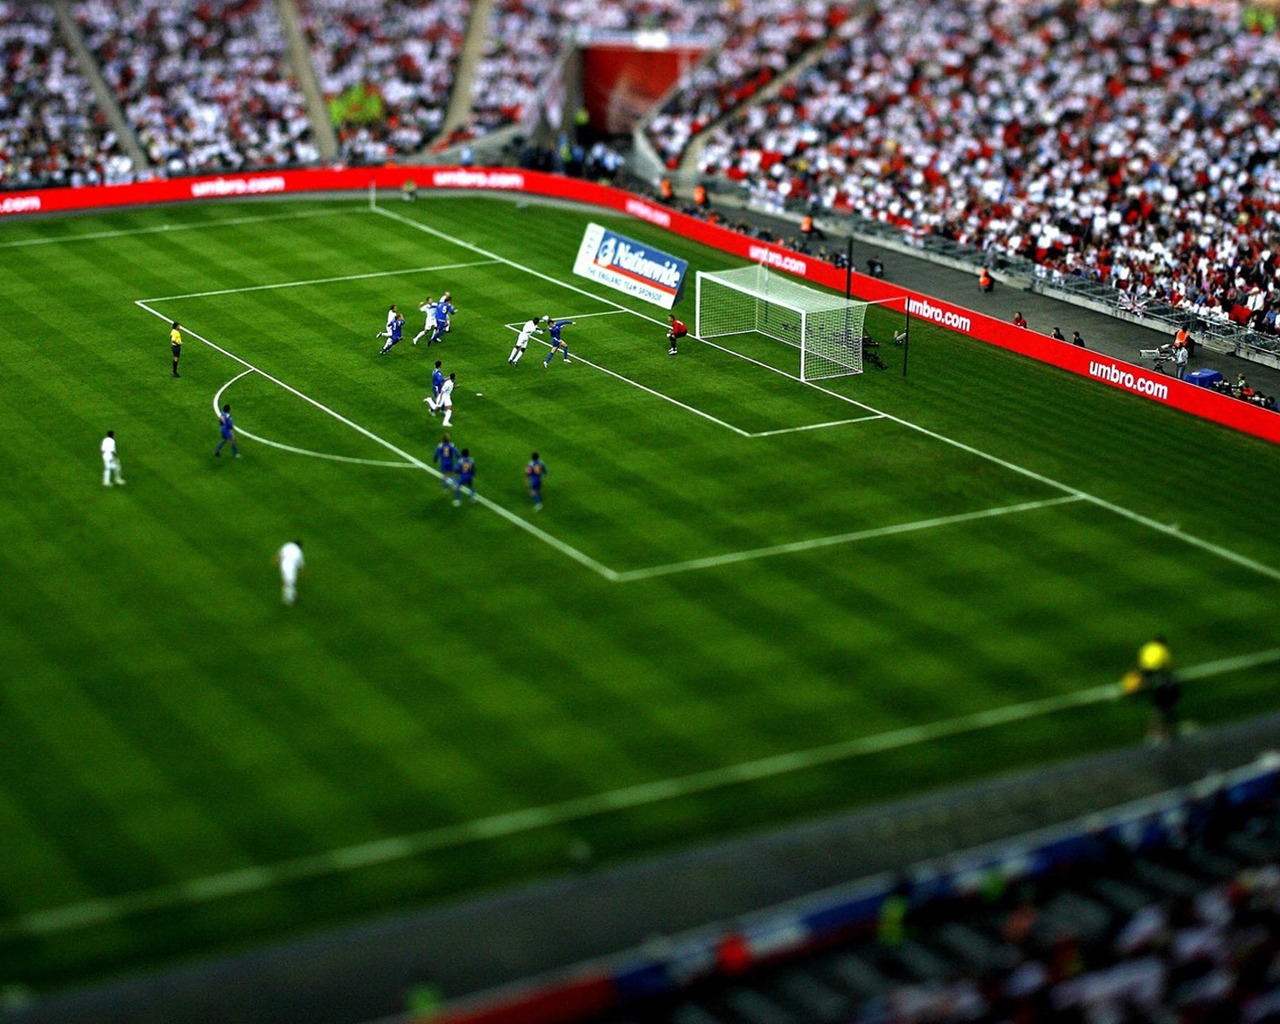 Stadium Toy Effect for 1280 x 1024 resolution